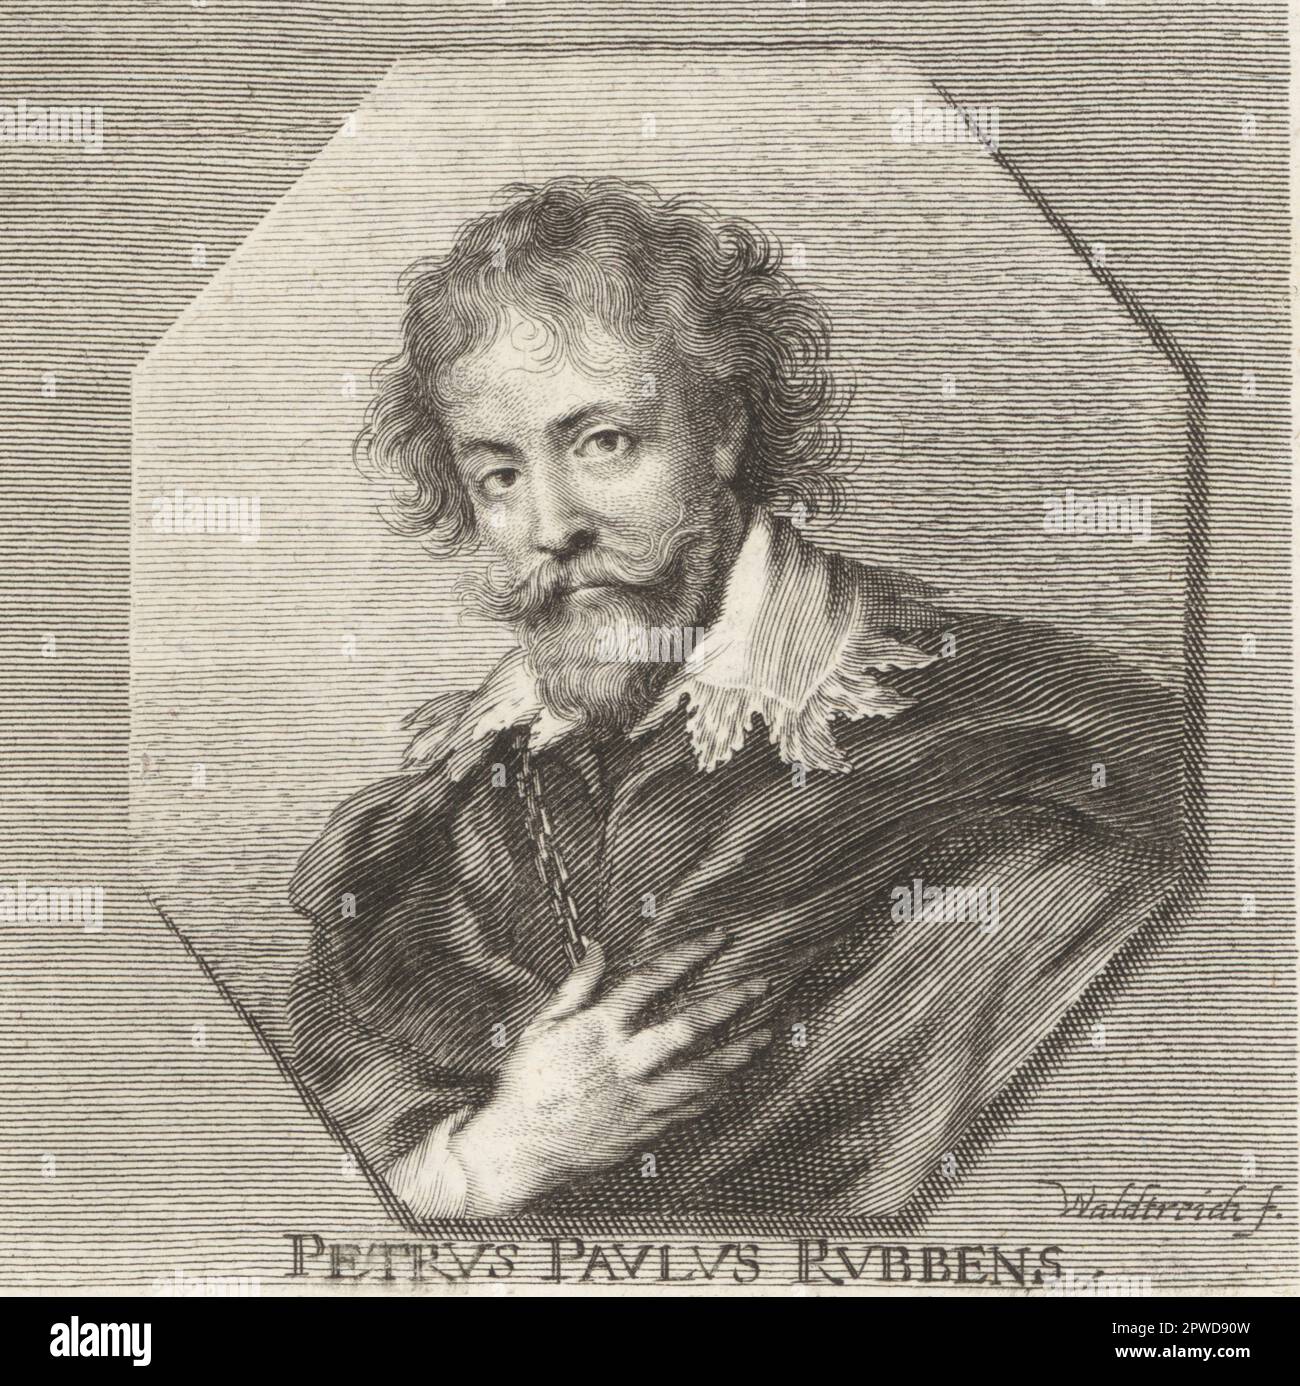 Sir Peter Paul Rubens, Flemish artist and diplomat from the Duchy of Brabant, 1577-1640. The most influential artist of the Flemish Baroque tradition. Petrus Paulus Rubbens. Copperplate engraving by Johann Georg Waldreich after an illustration by Joachim von Sandrart from his L’Academia Todesca, della Architectura, Scultura & Pittura, oder Teutsche Academie, der Edlen Bau- Bild- und Mahlerey-Kunste, German Academy of Architecture, Sculpture and Painting, Jacob von Sandrart, Nuremberg, 1675. Stock Photo